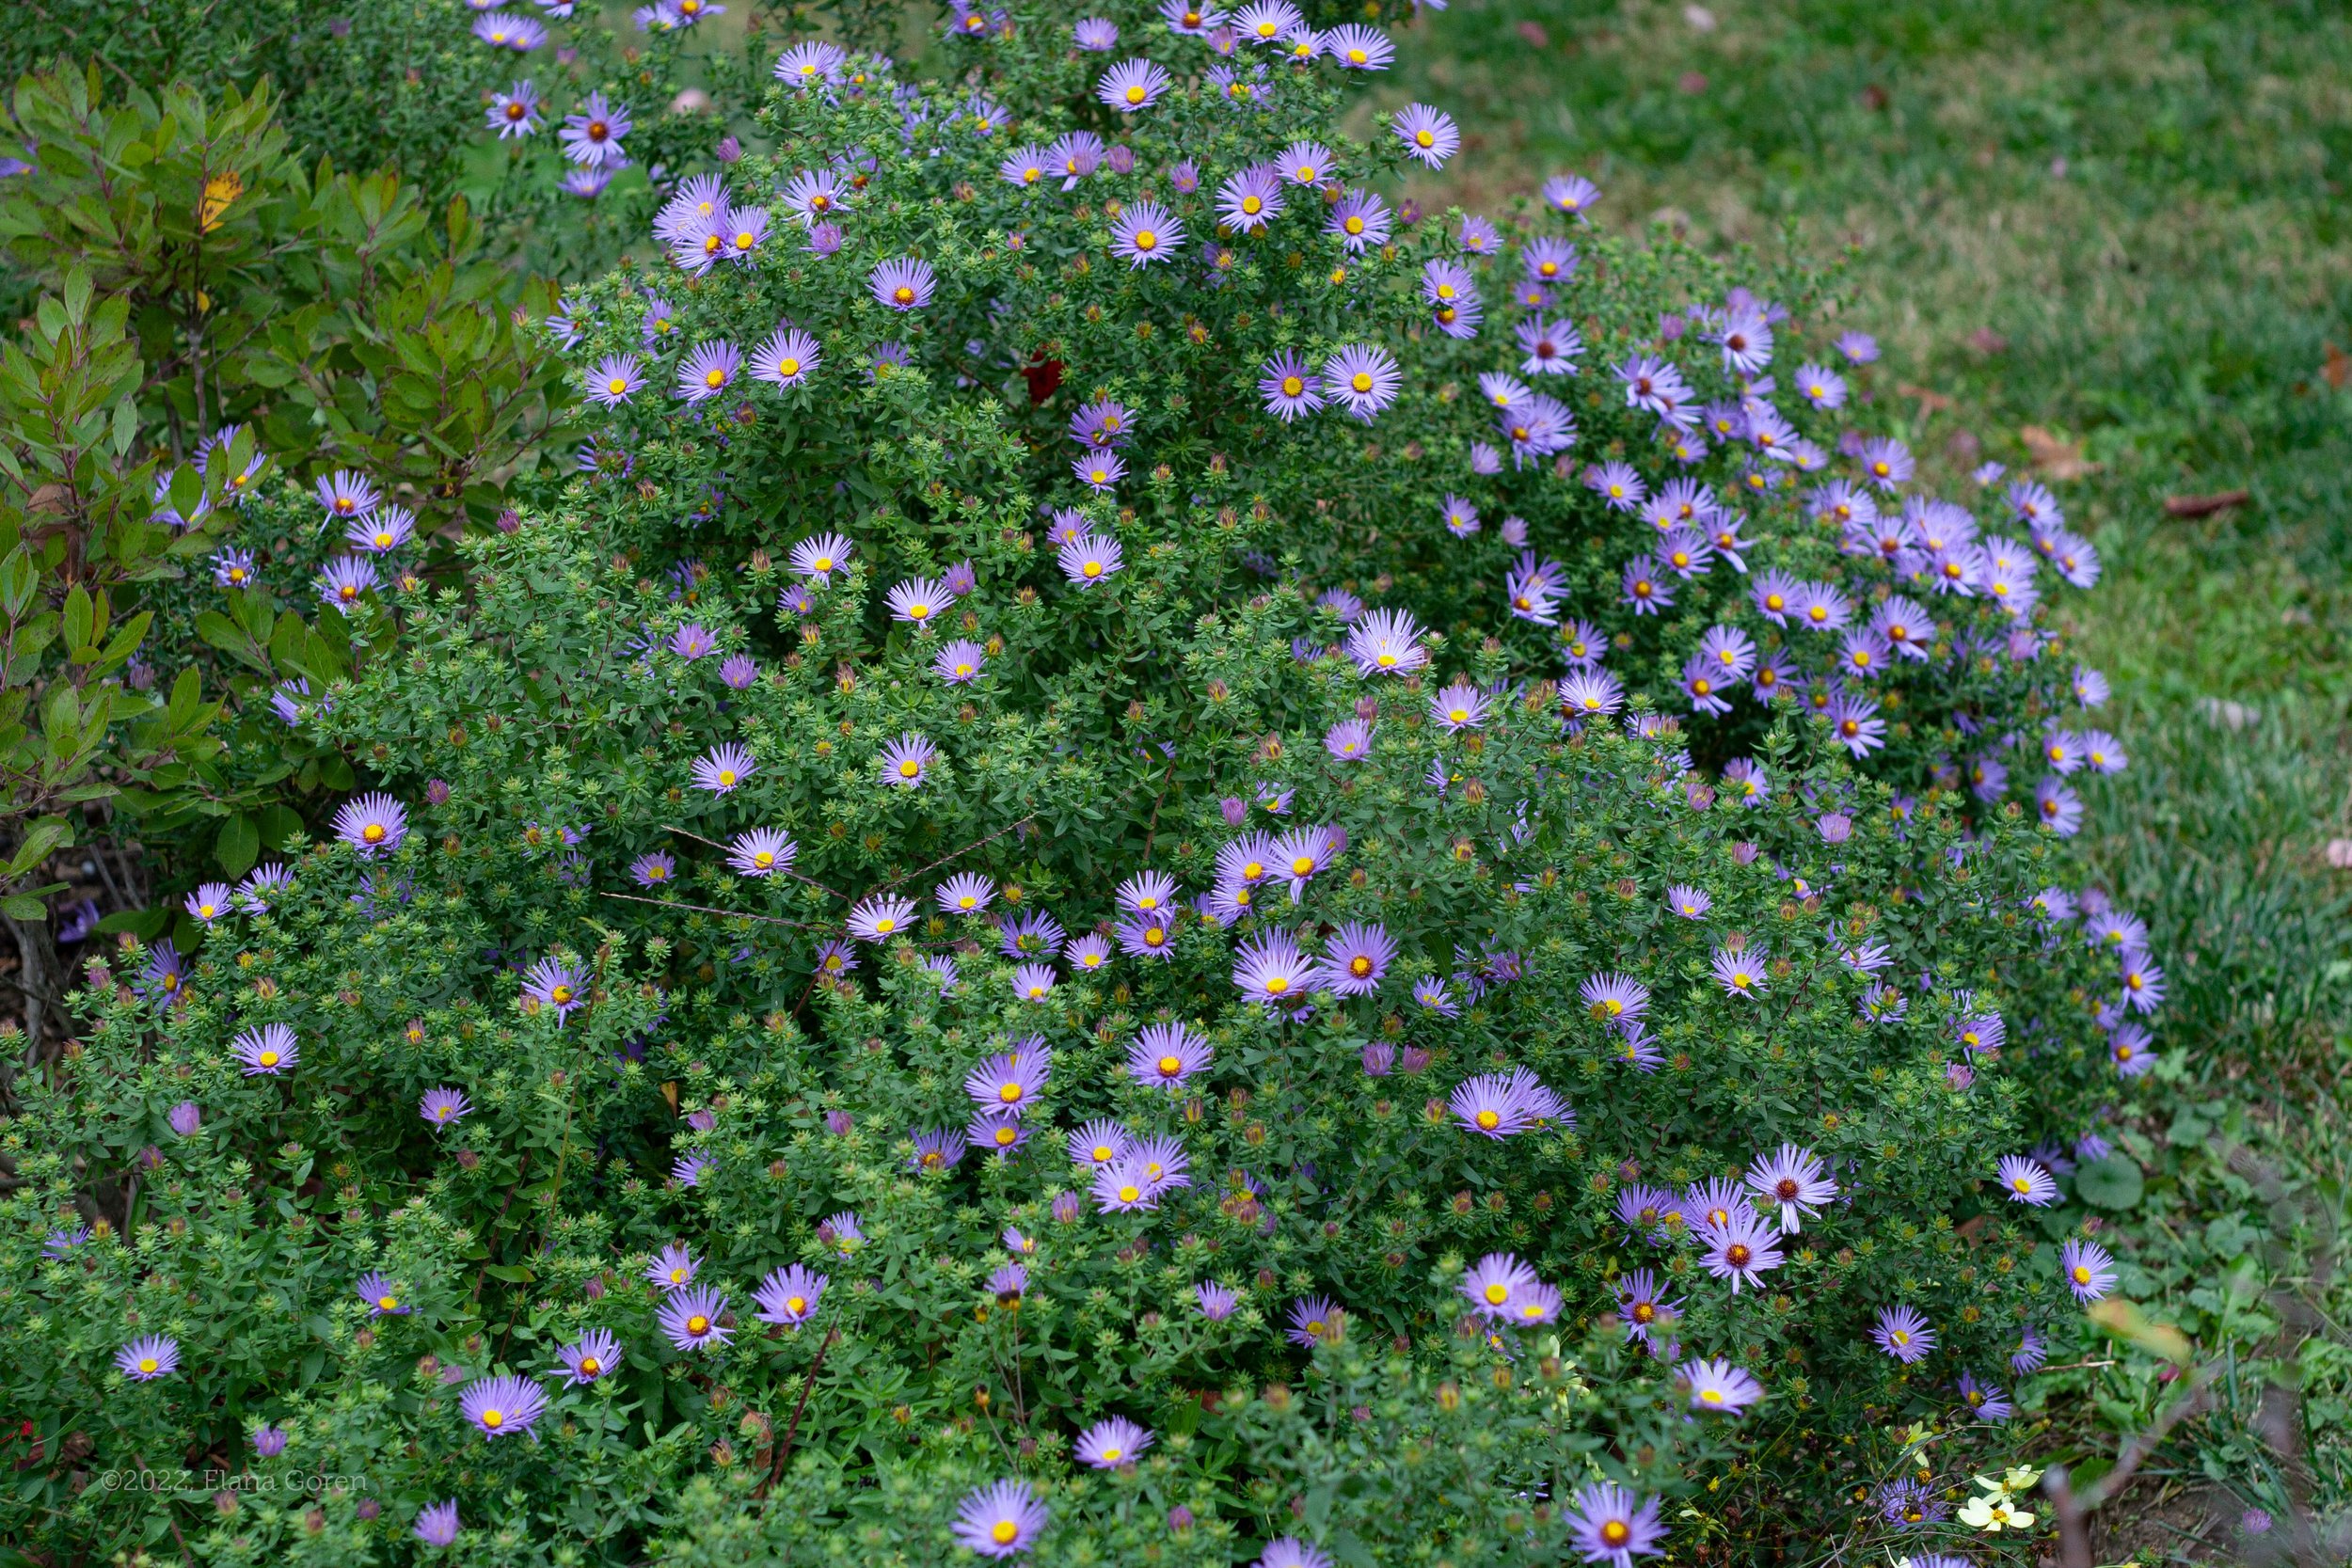 Mass blooms starting to open on Aromatic Aster 'Raydon's Favorite'